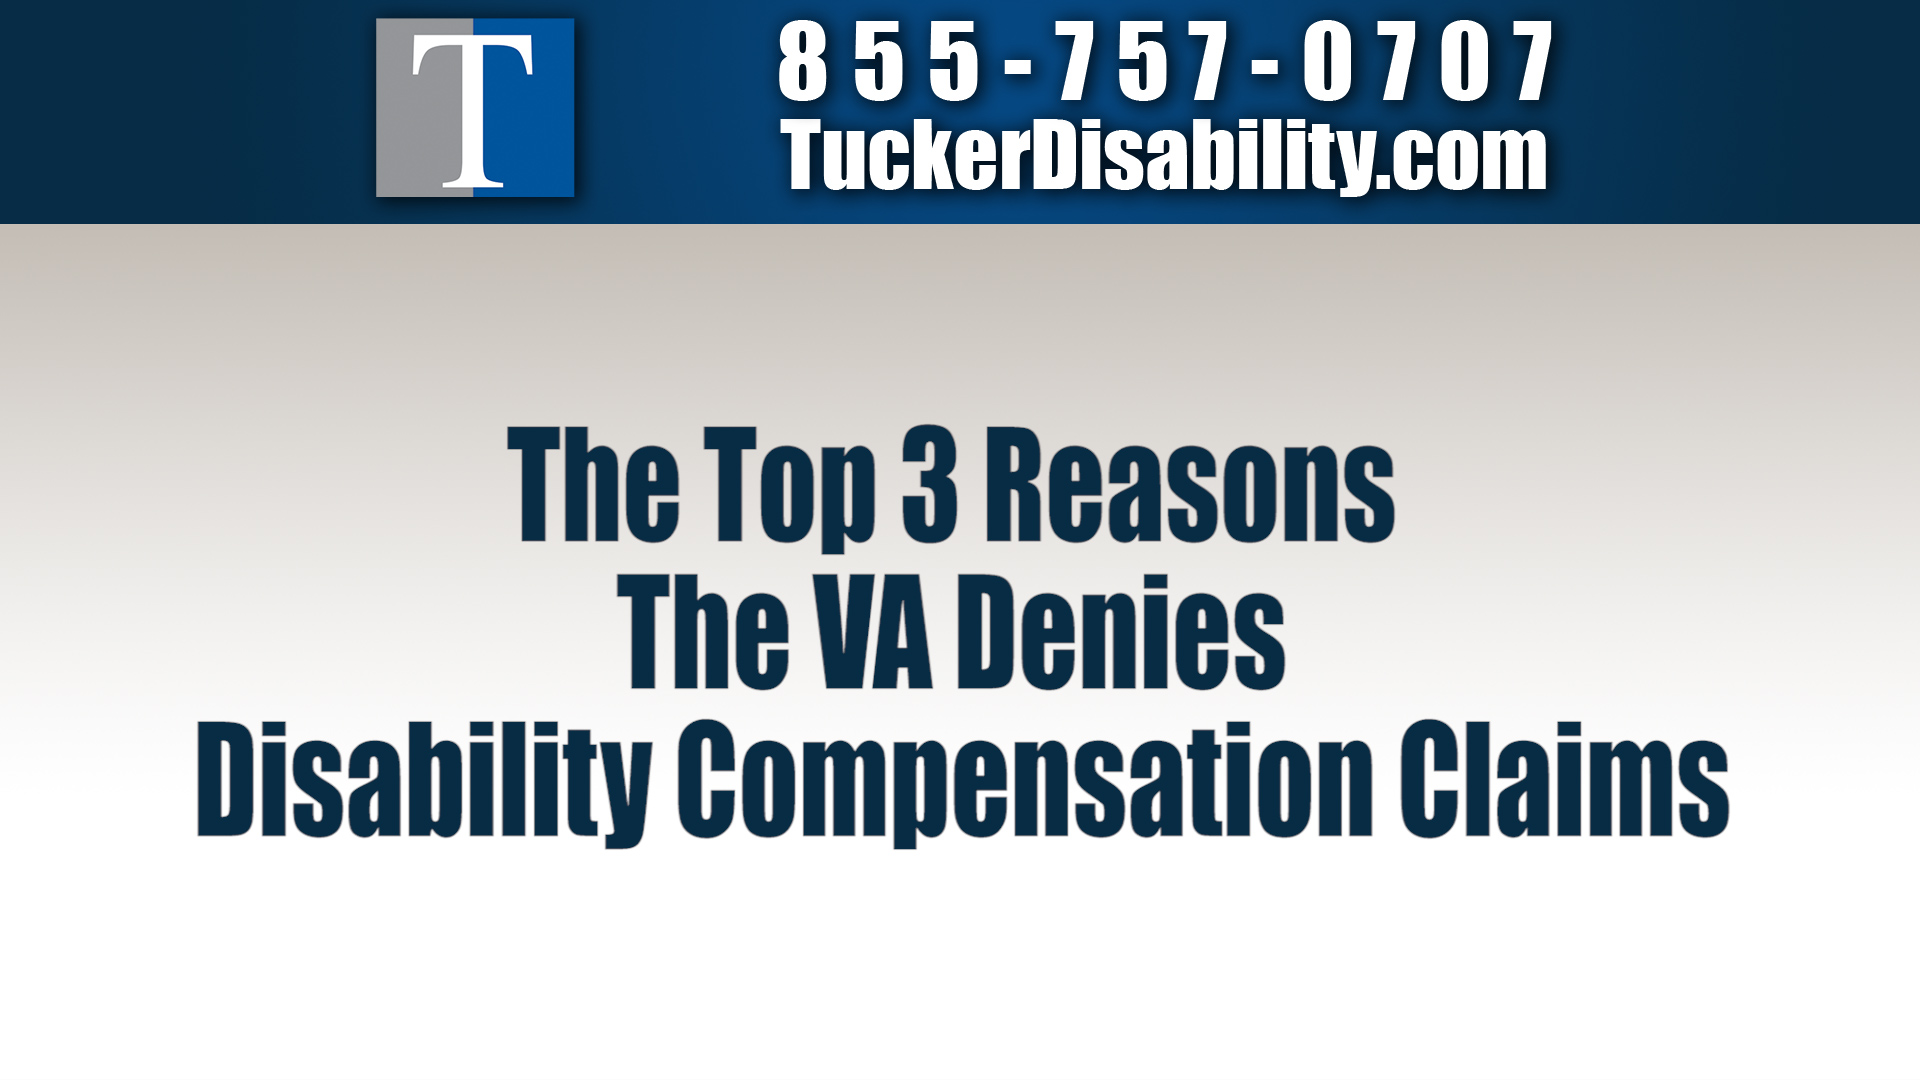 Top 3 Reasons the VA Denies Disability Compensation Claims